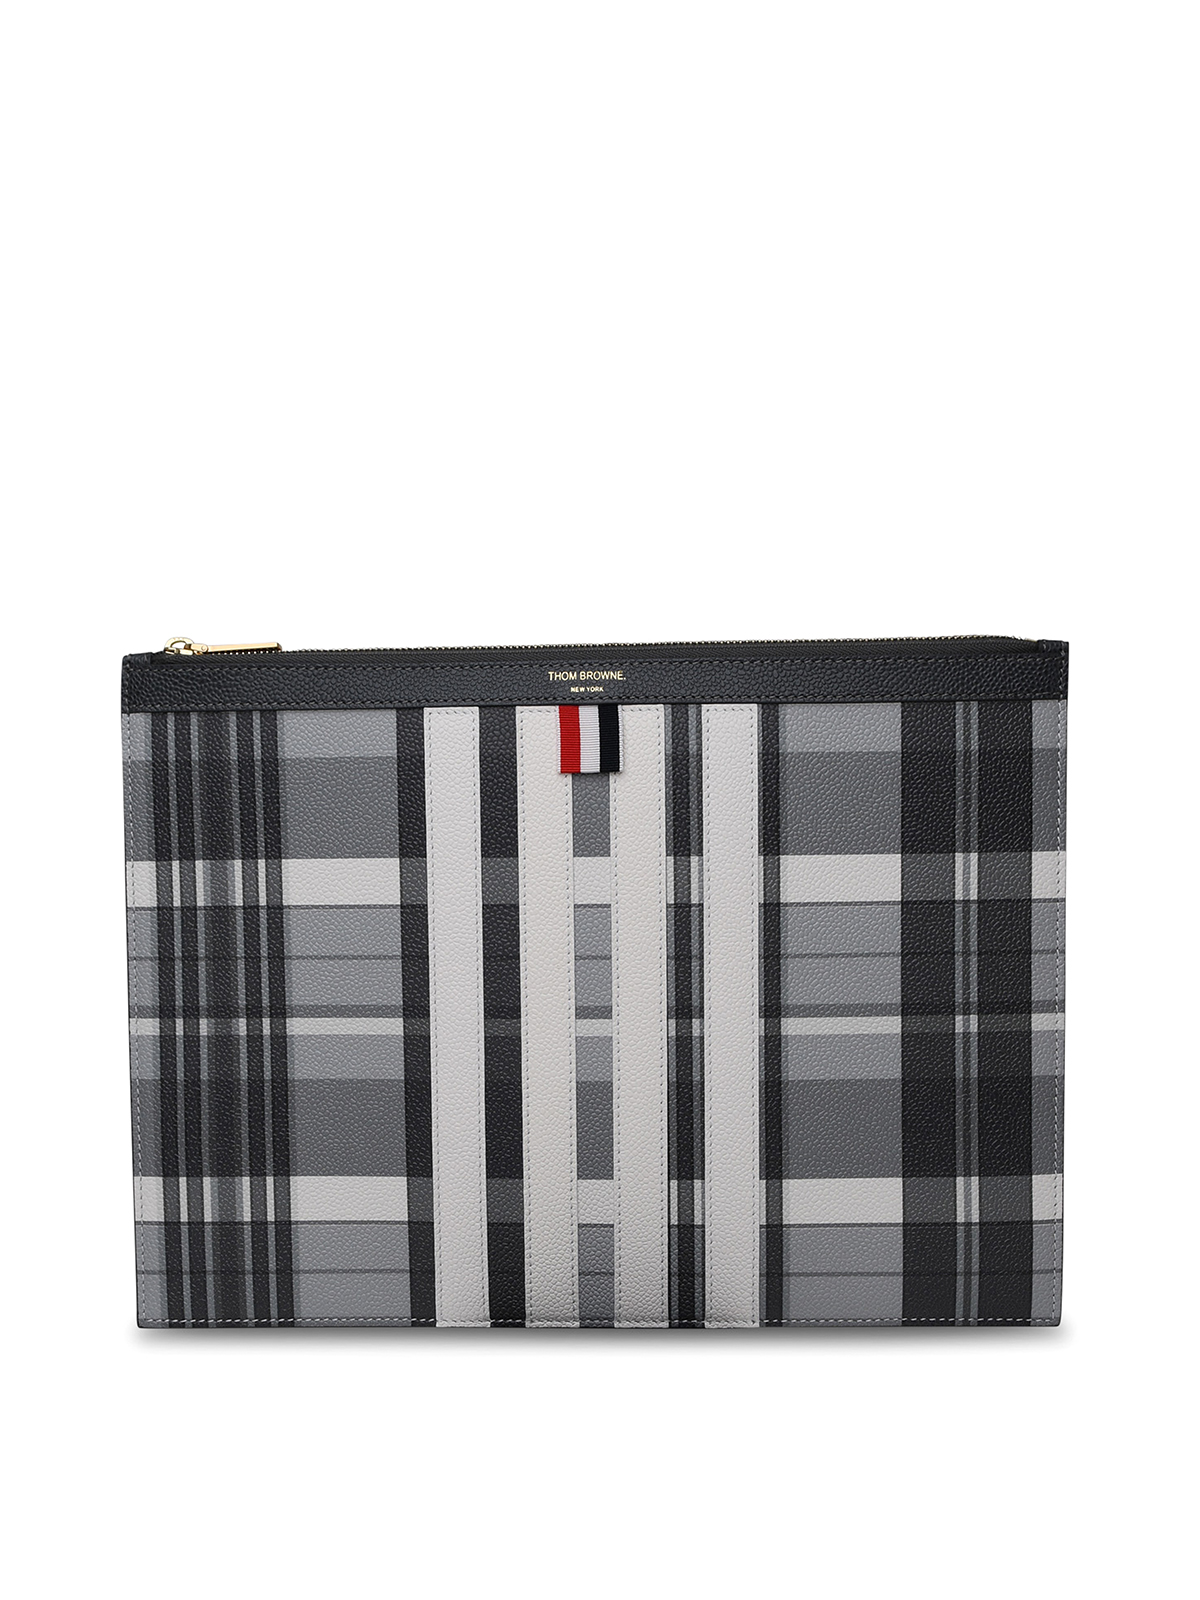 Thom Browne Leather Document Holder In Black